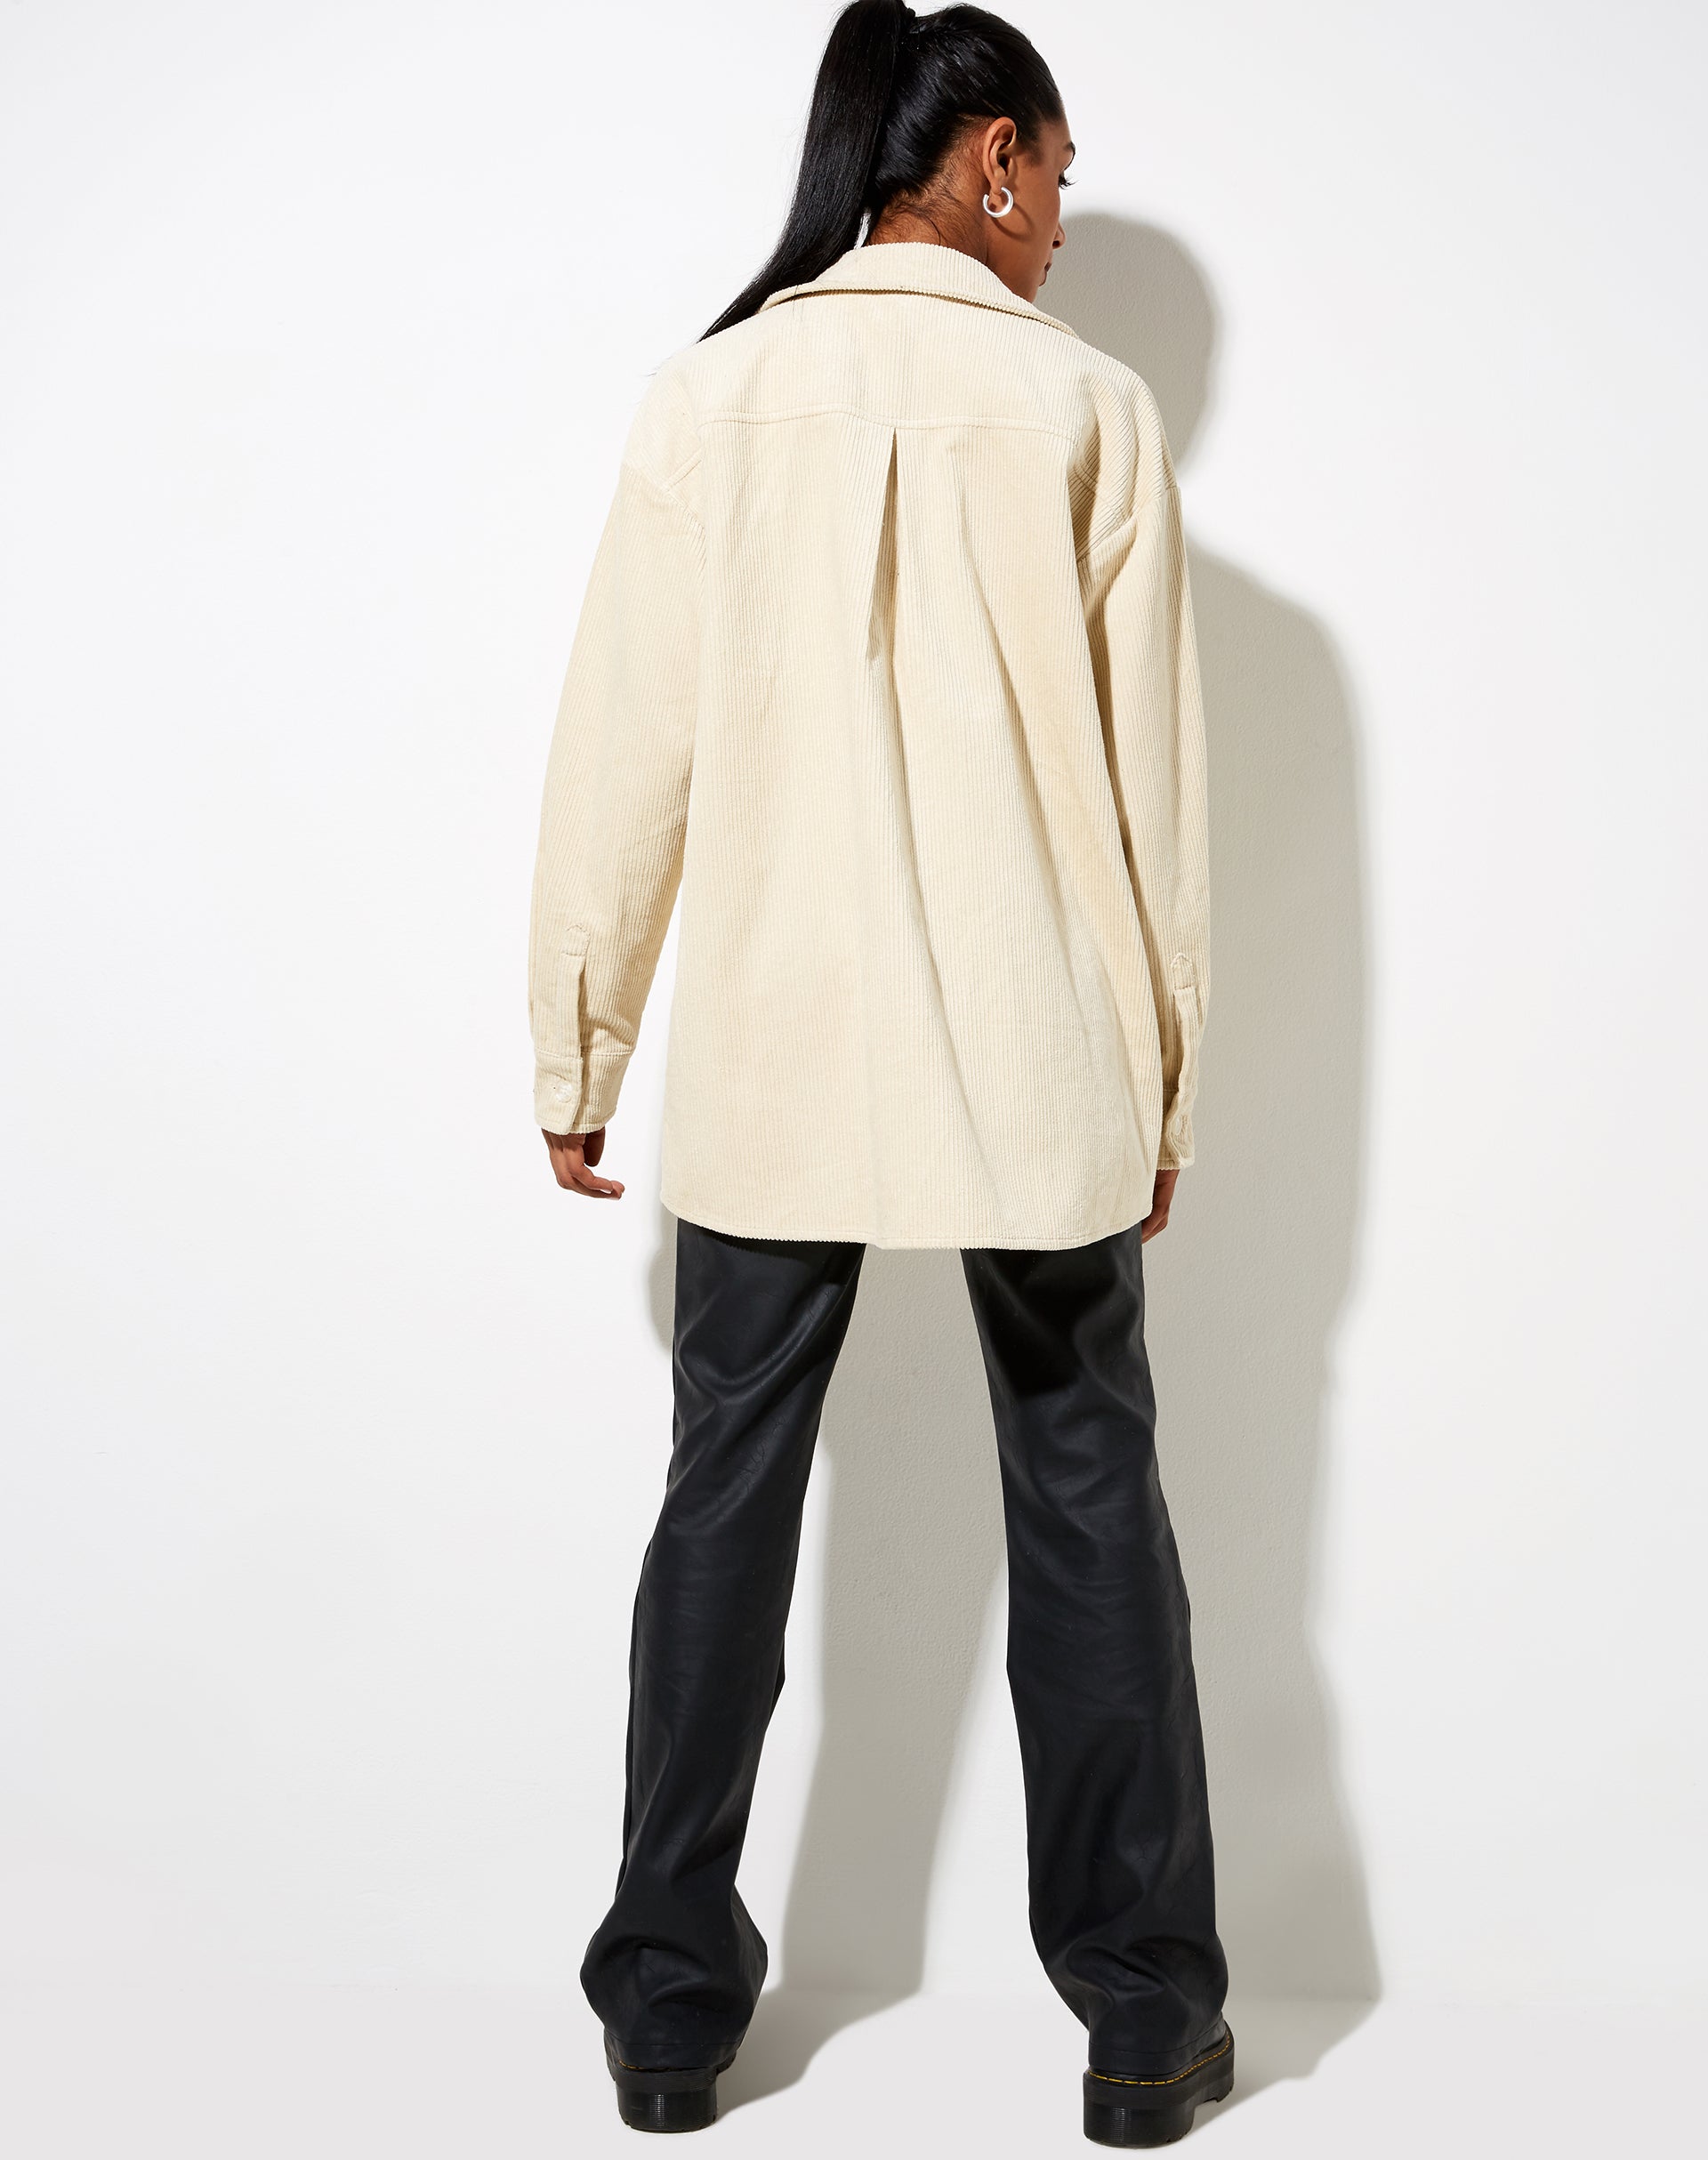 Image of Marcy Shirt in Corduroy Tan